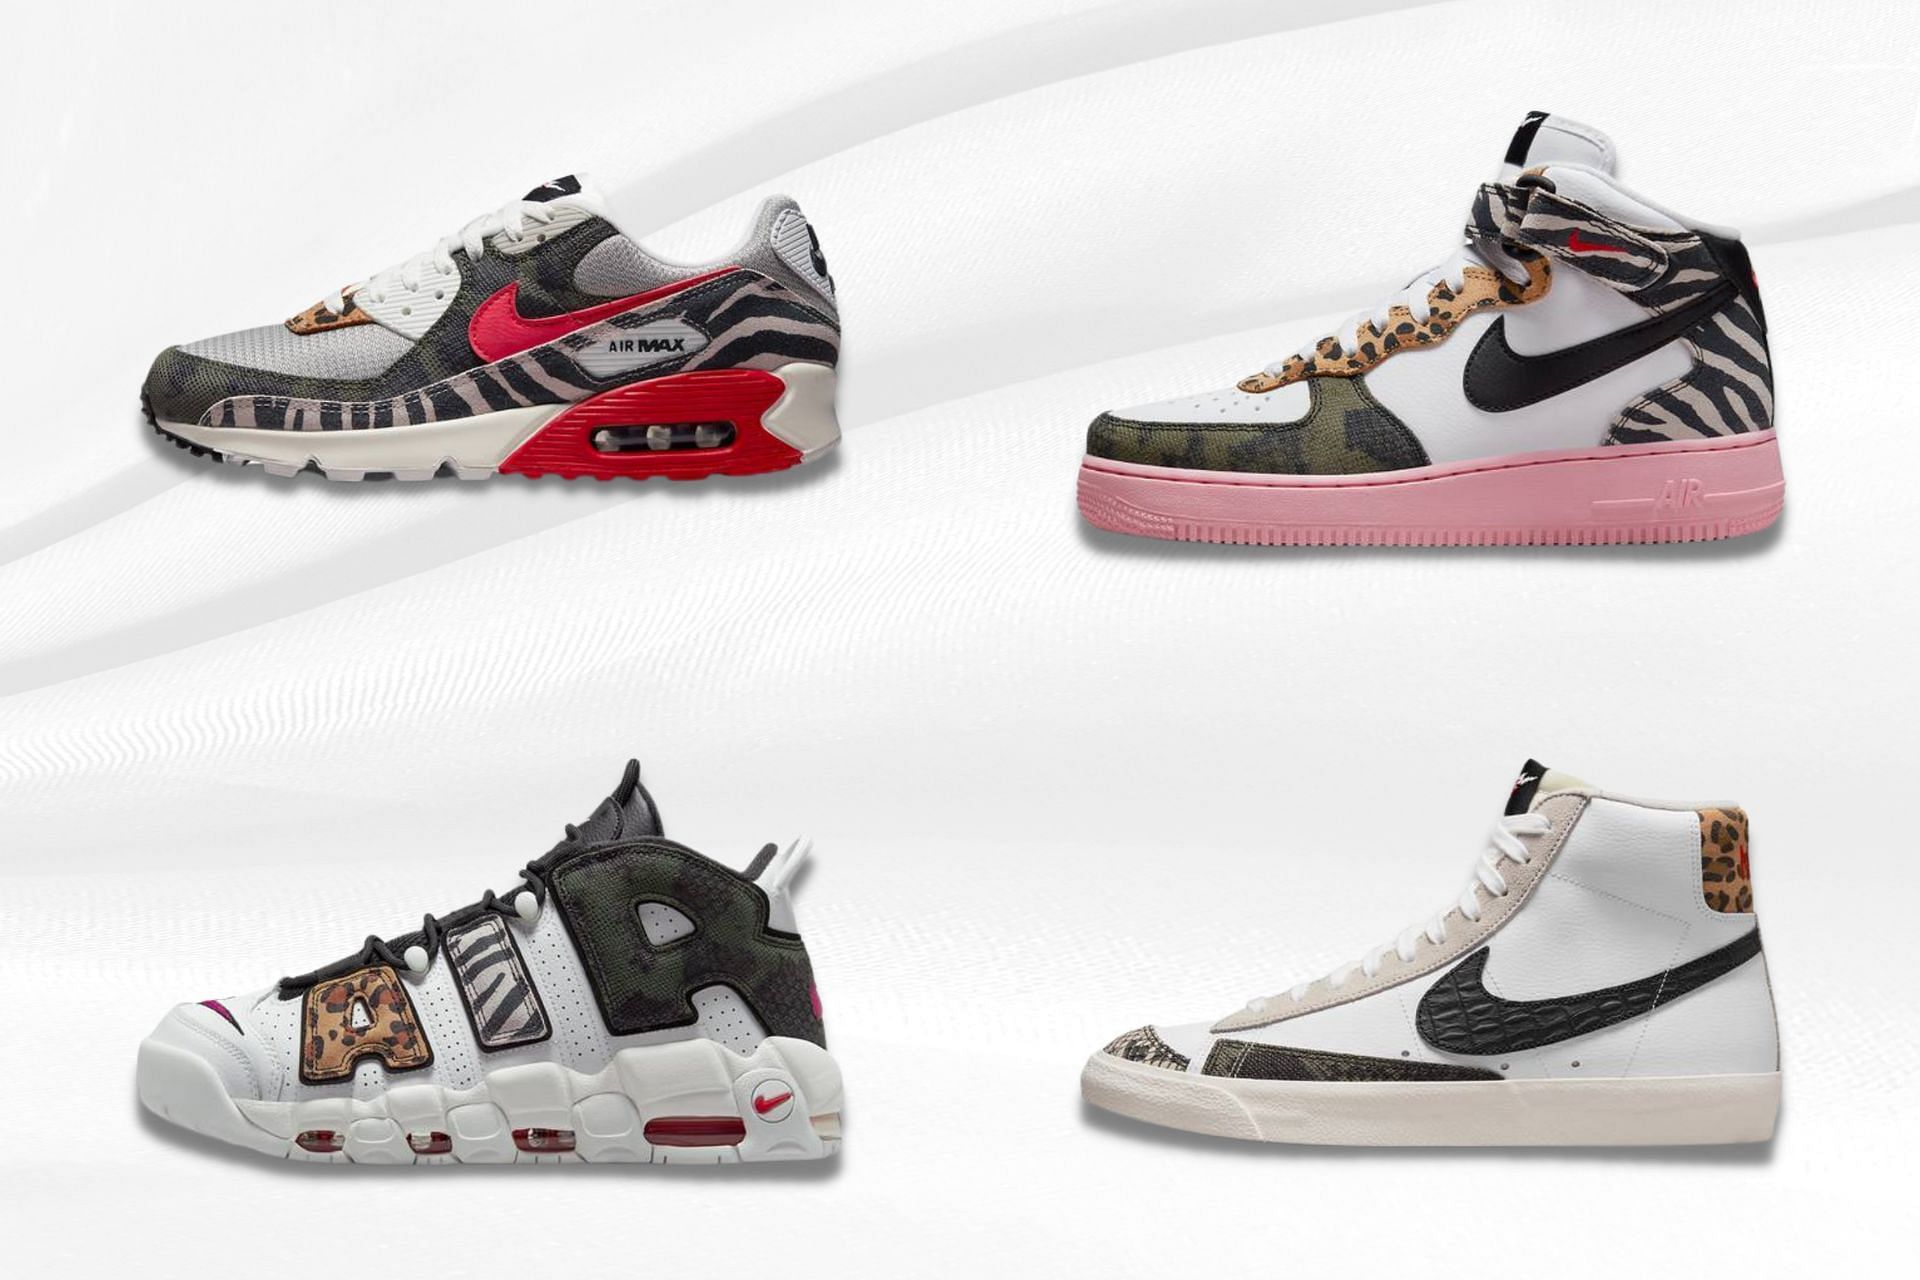 Upcoming Nike Animal Instinct footwear collection featuring Air Max 90, Air Force 1 Mid, and more (Image via Sportskeeda)